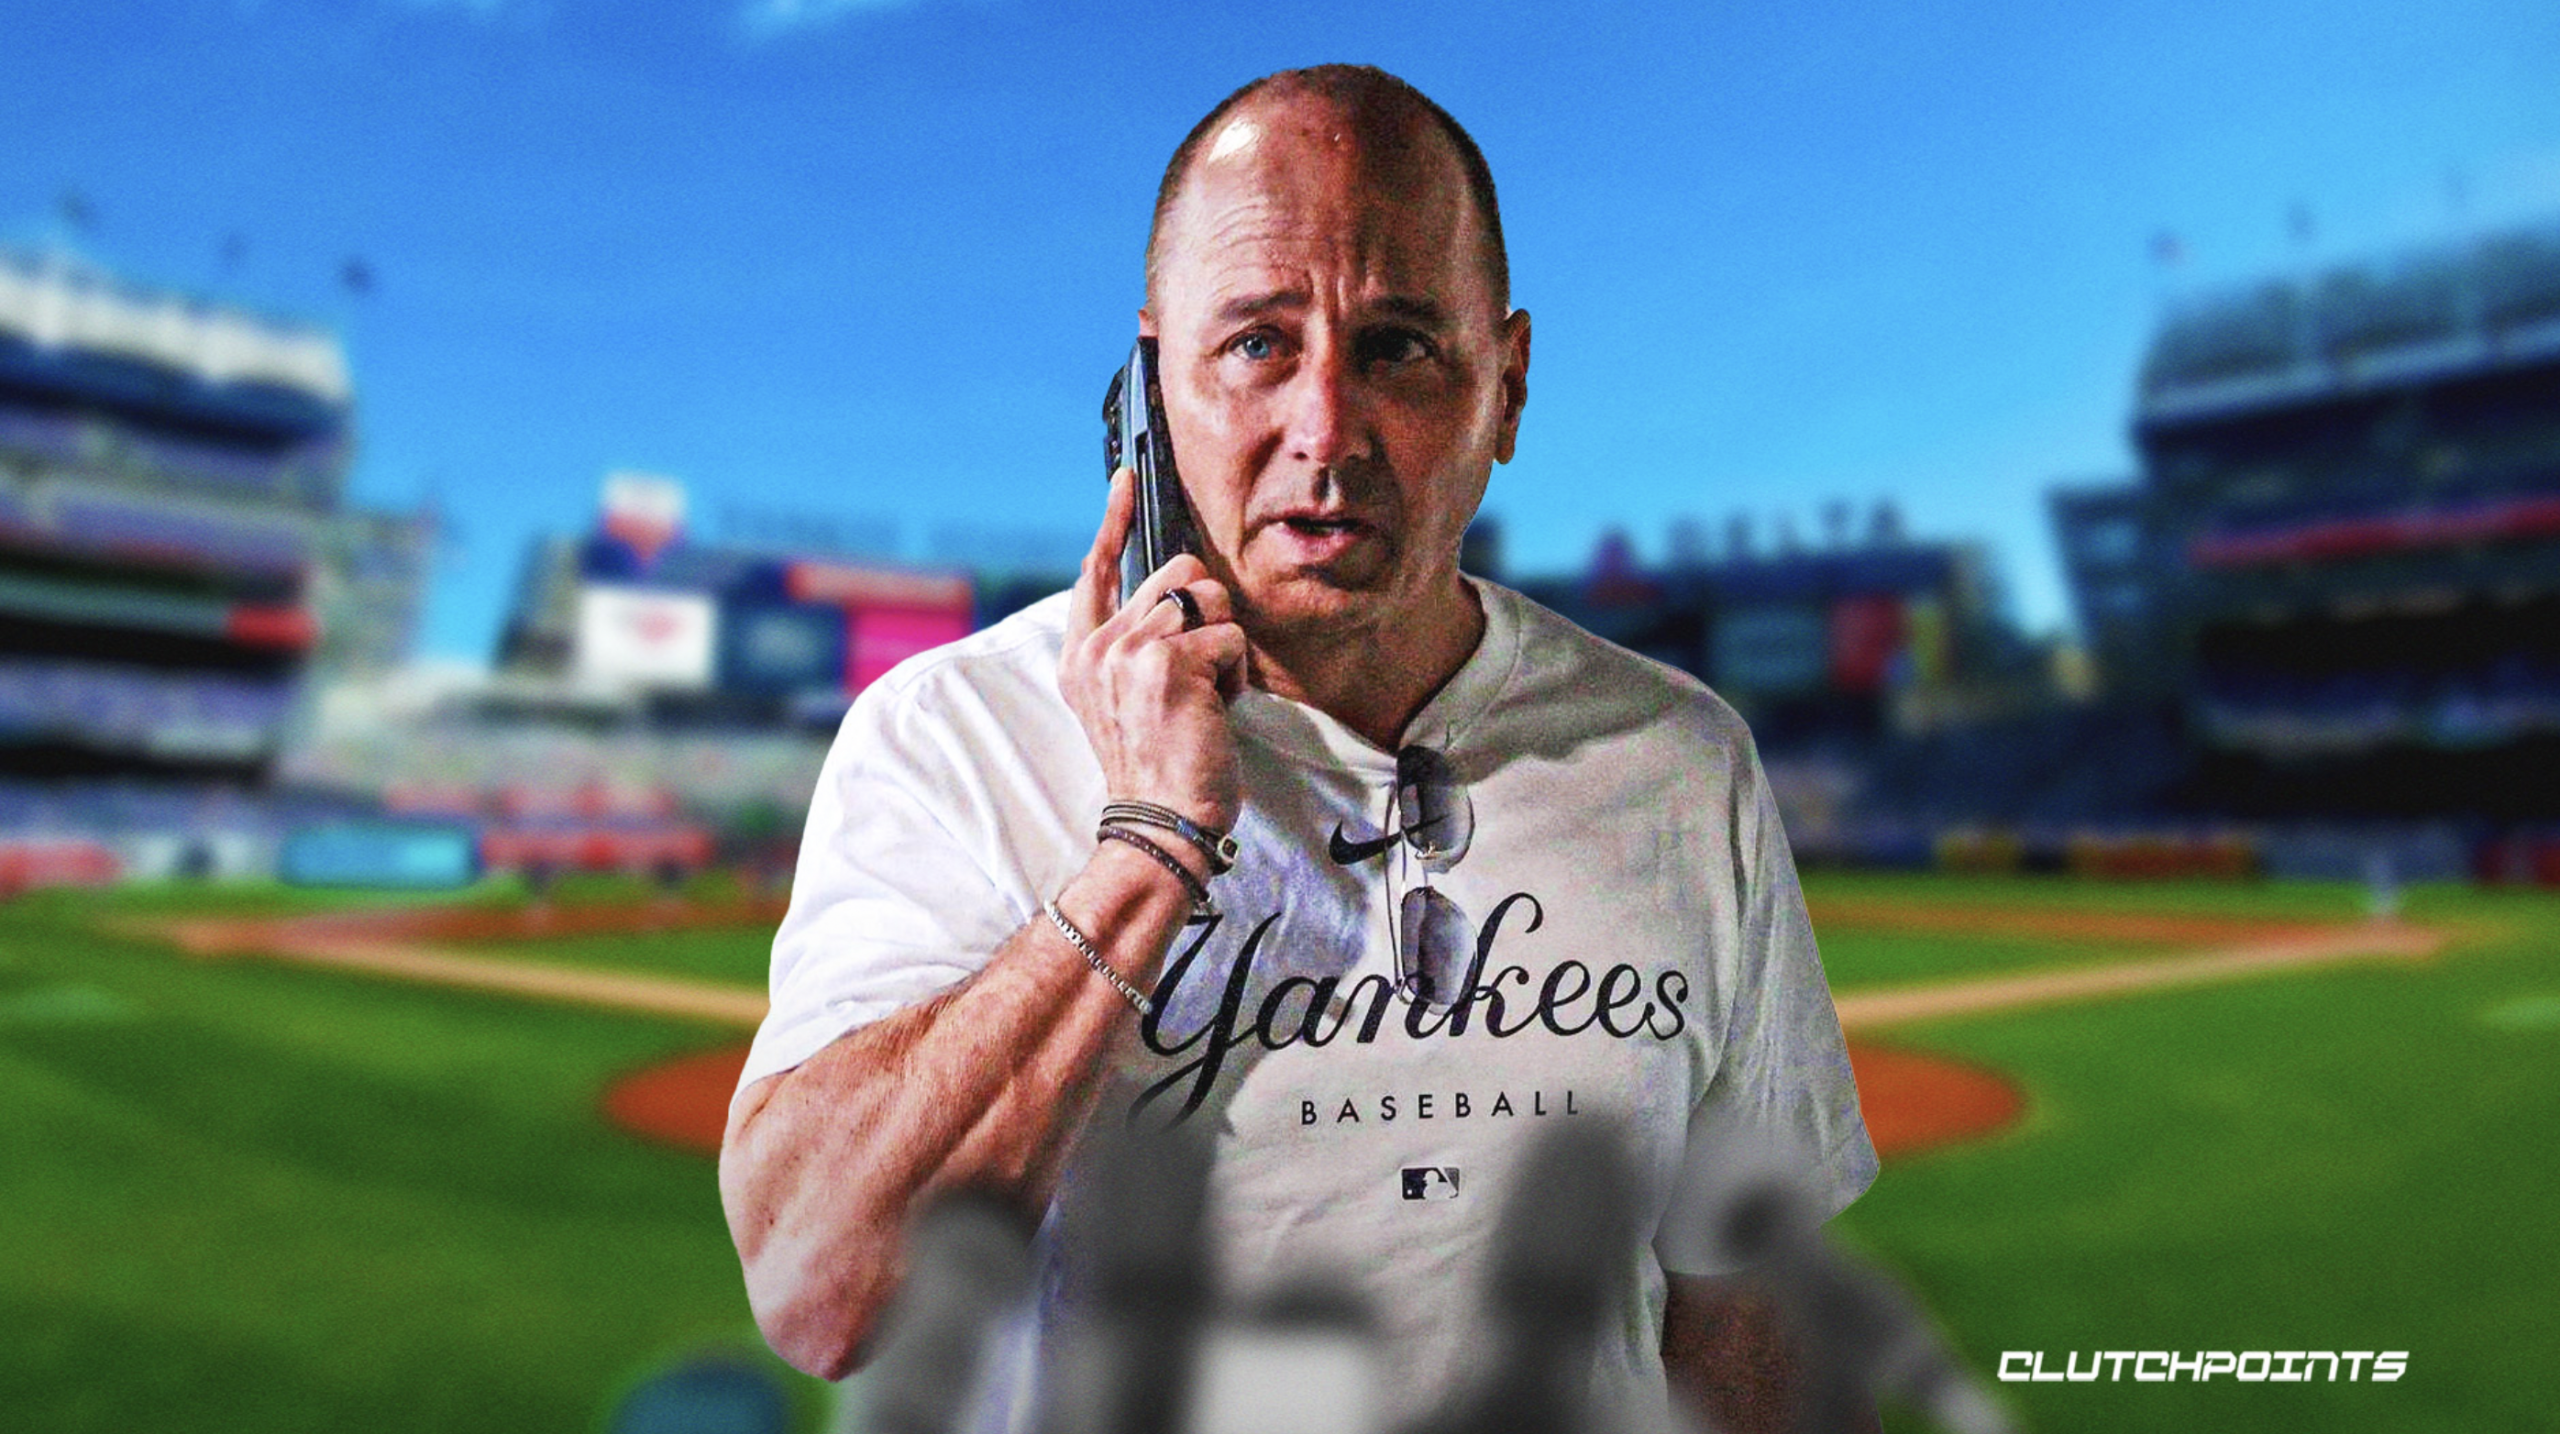 Brian Cashman found Yankees' play in 2009 unacceptable, before they turned it around